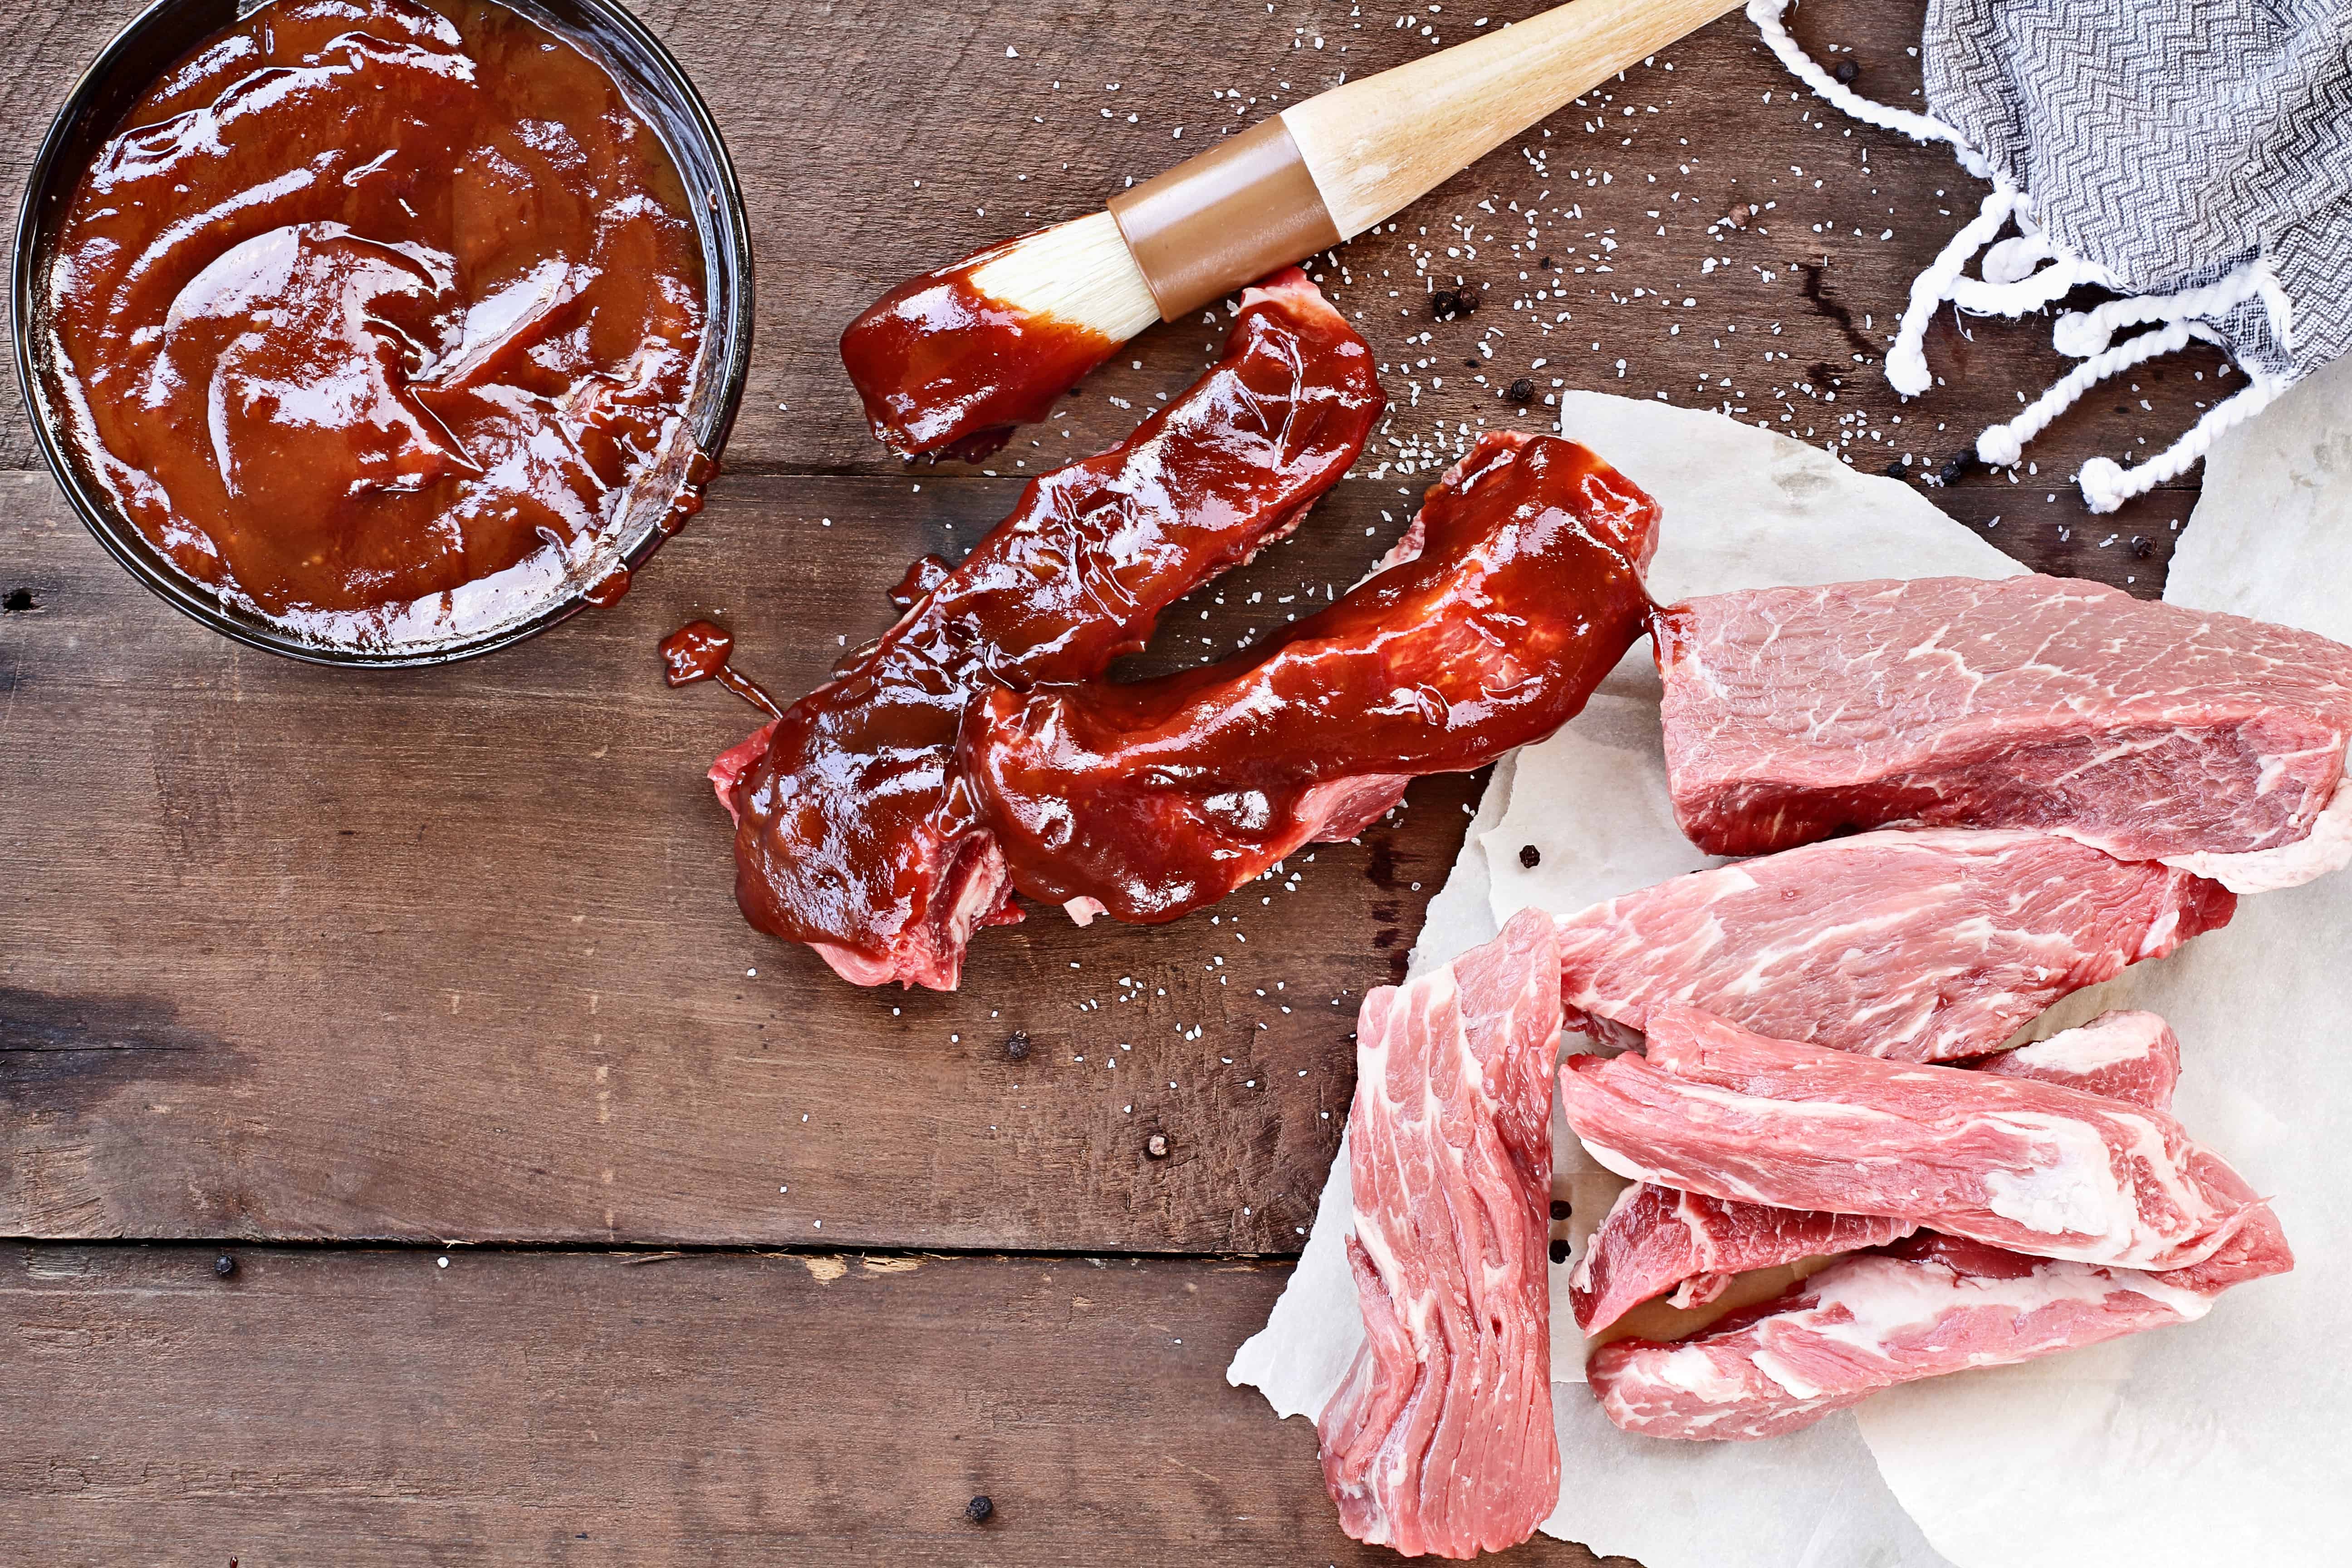 Country ribs with barbecue sauce and basting brush over a rustic table.